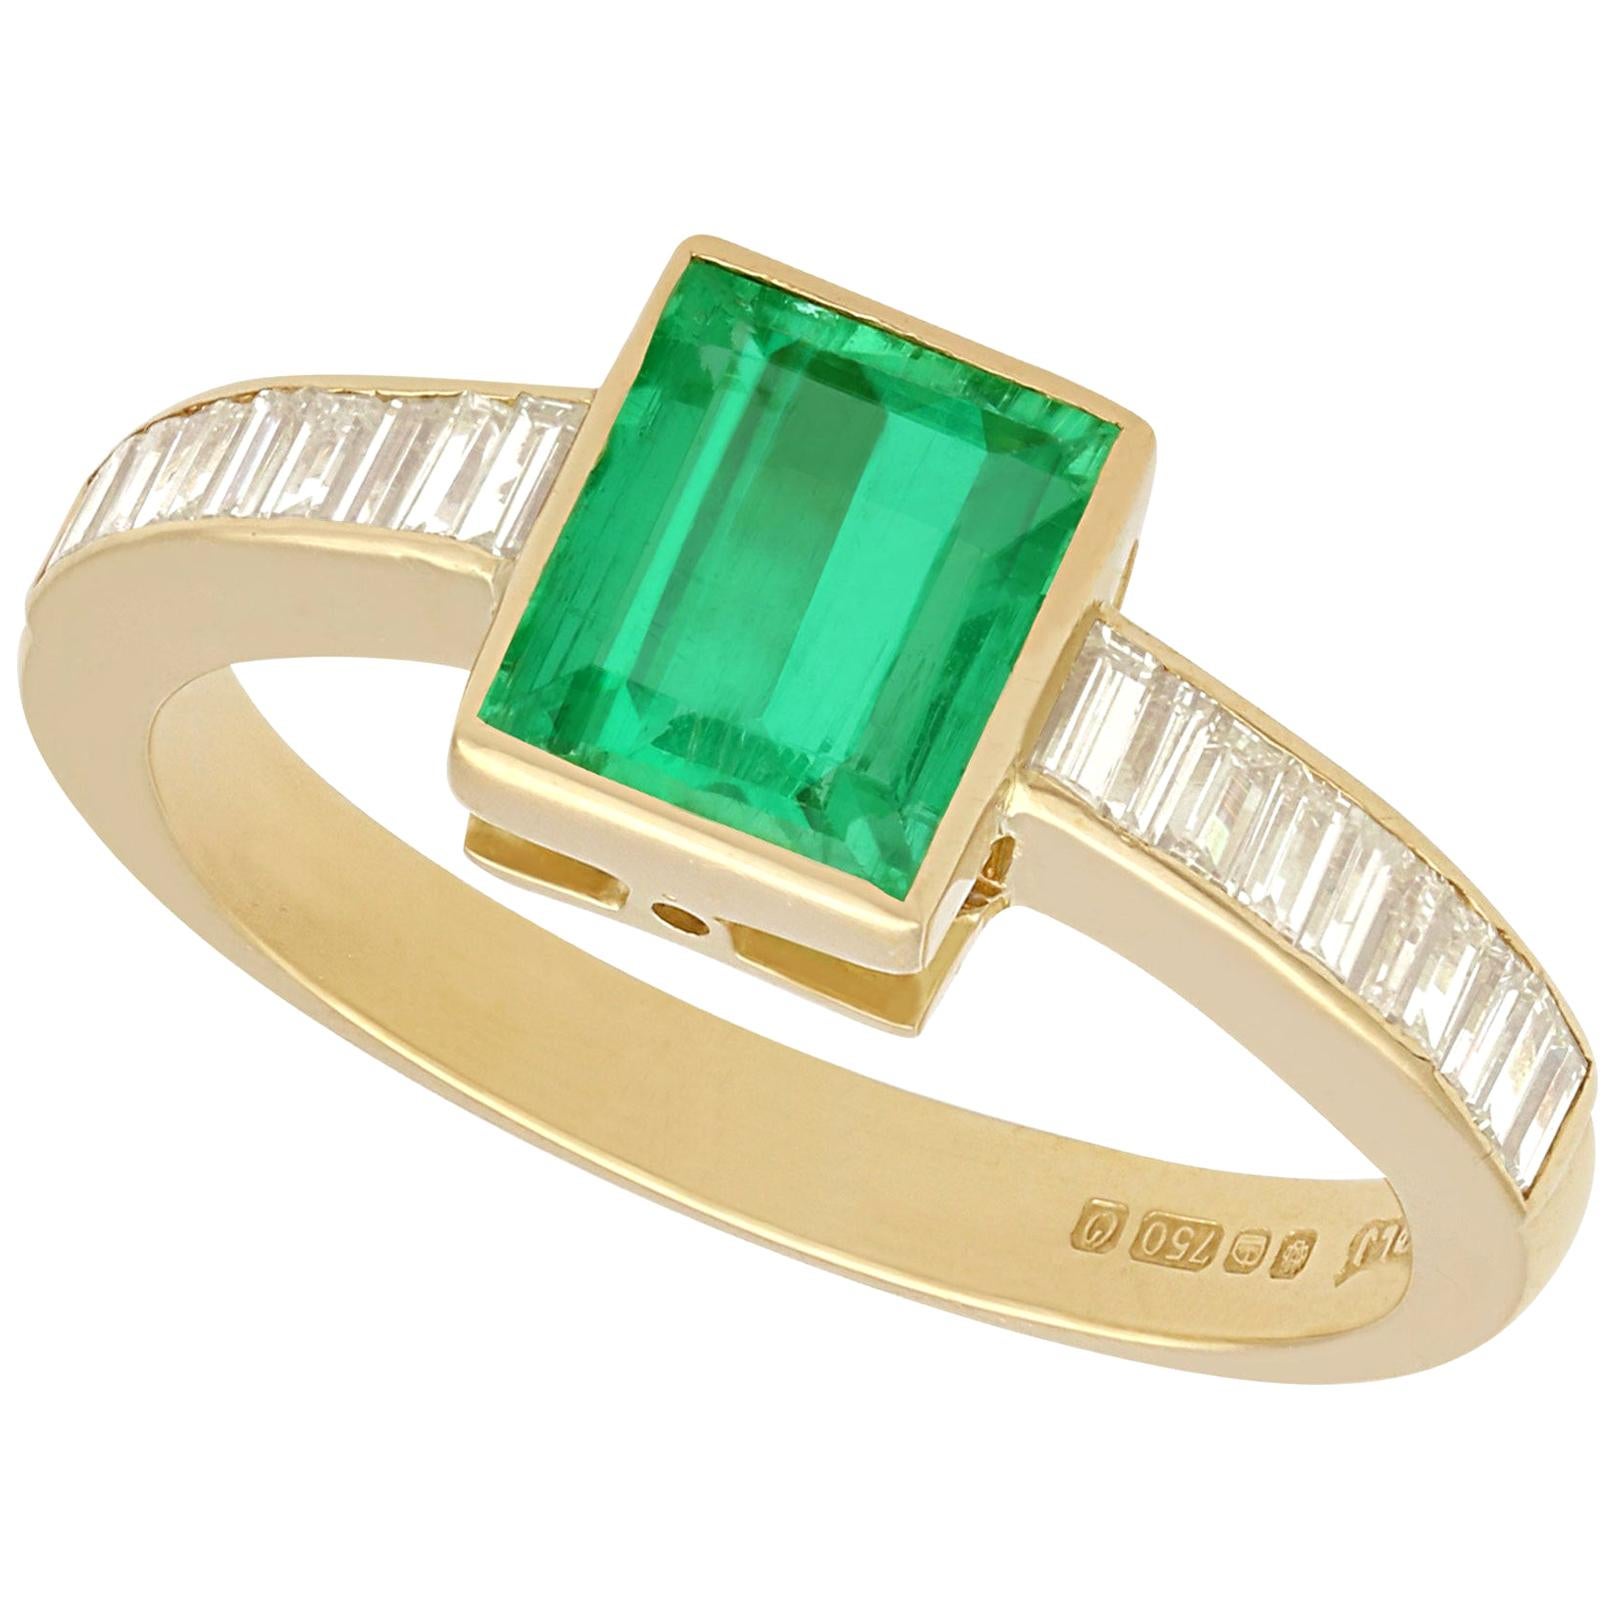 1988 1.10 Carat Emerald and Diamond Yellow Gold Cocktail Ring